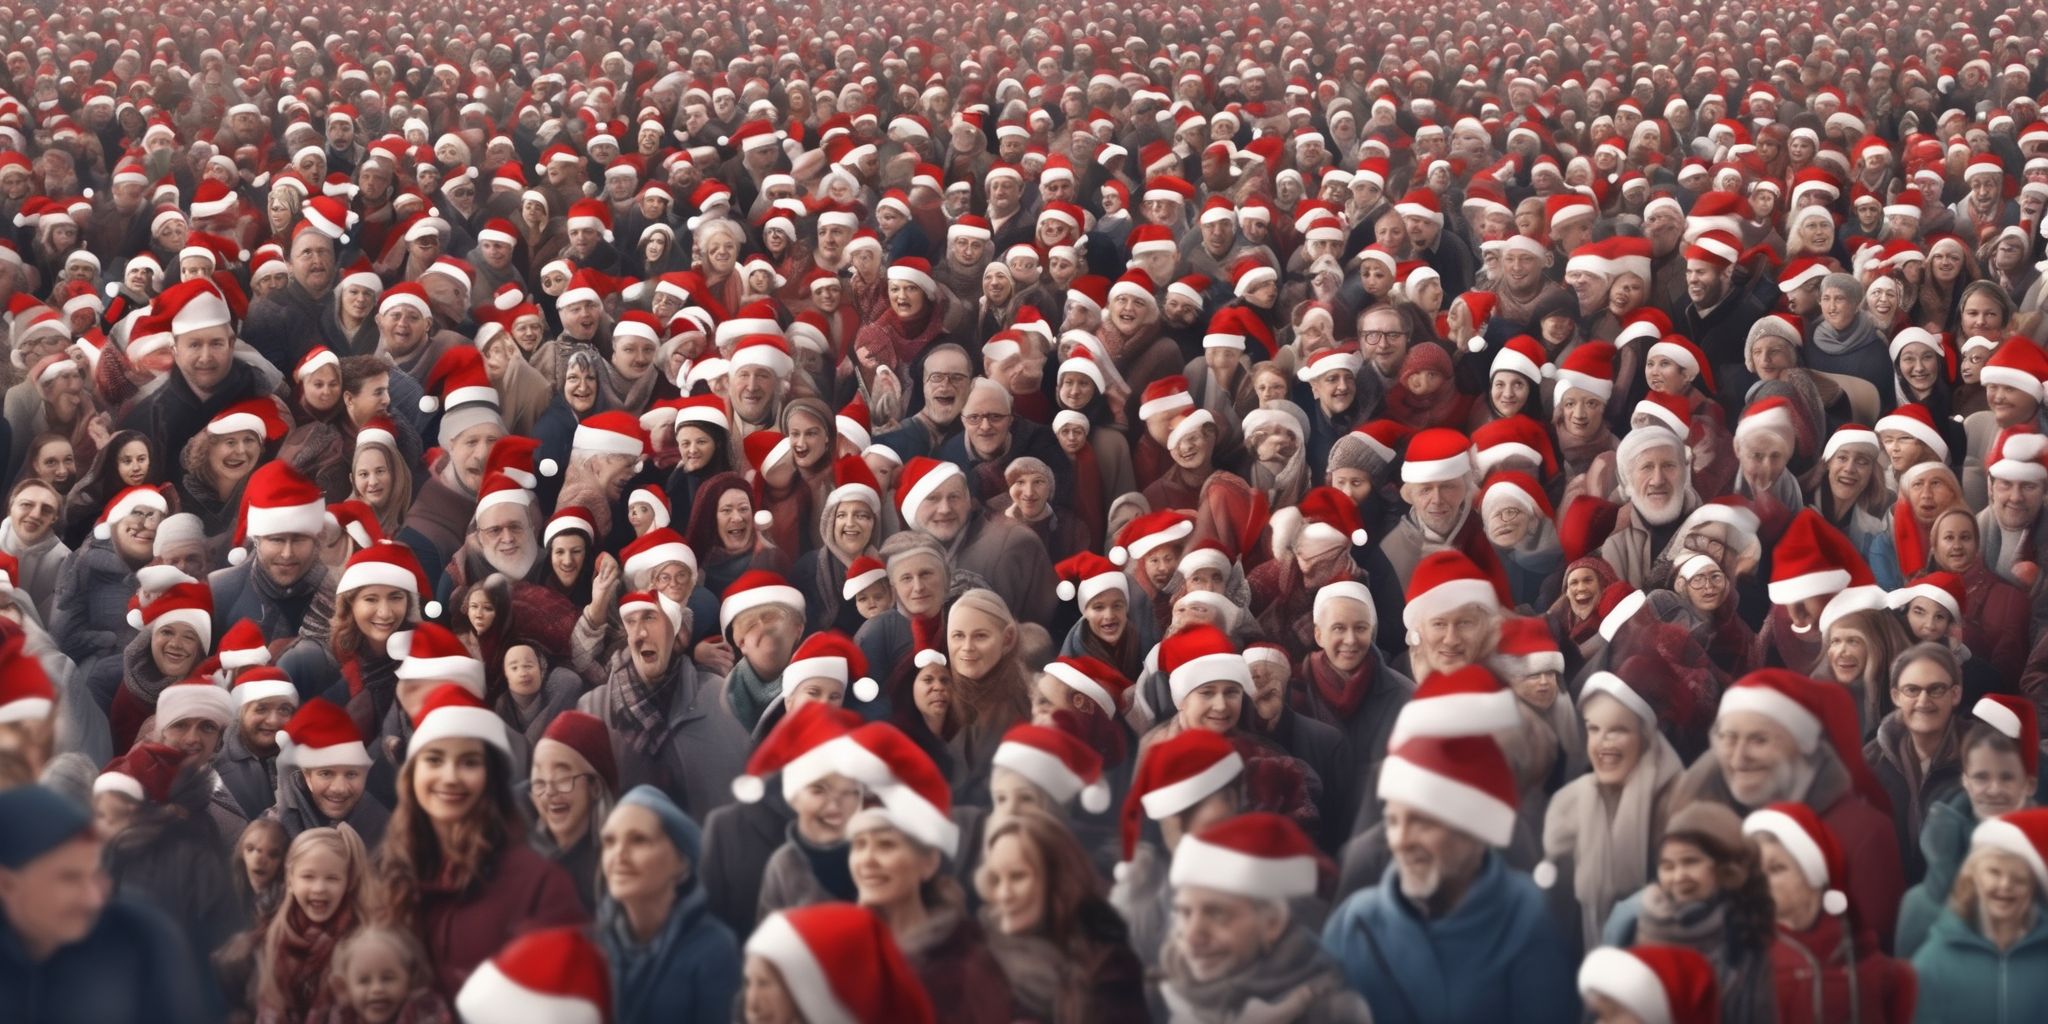 Crowds in realistic Christmas style